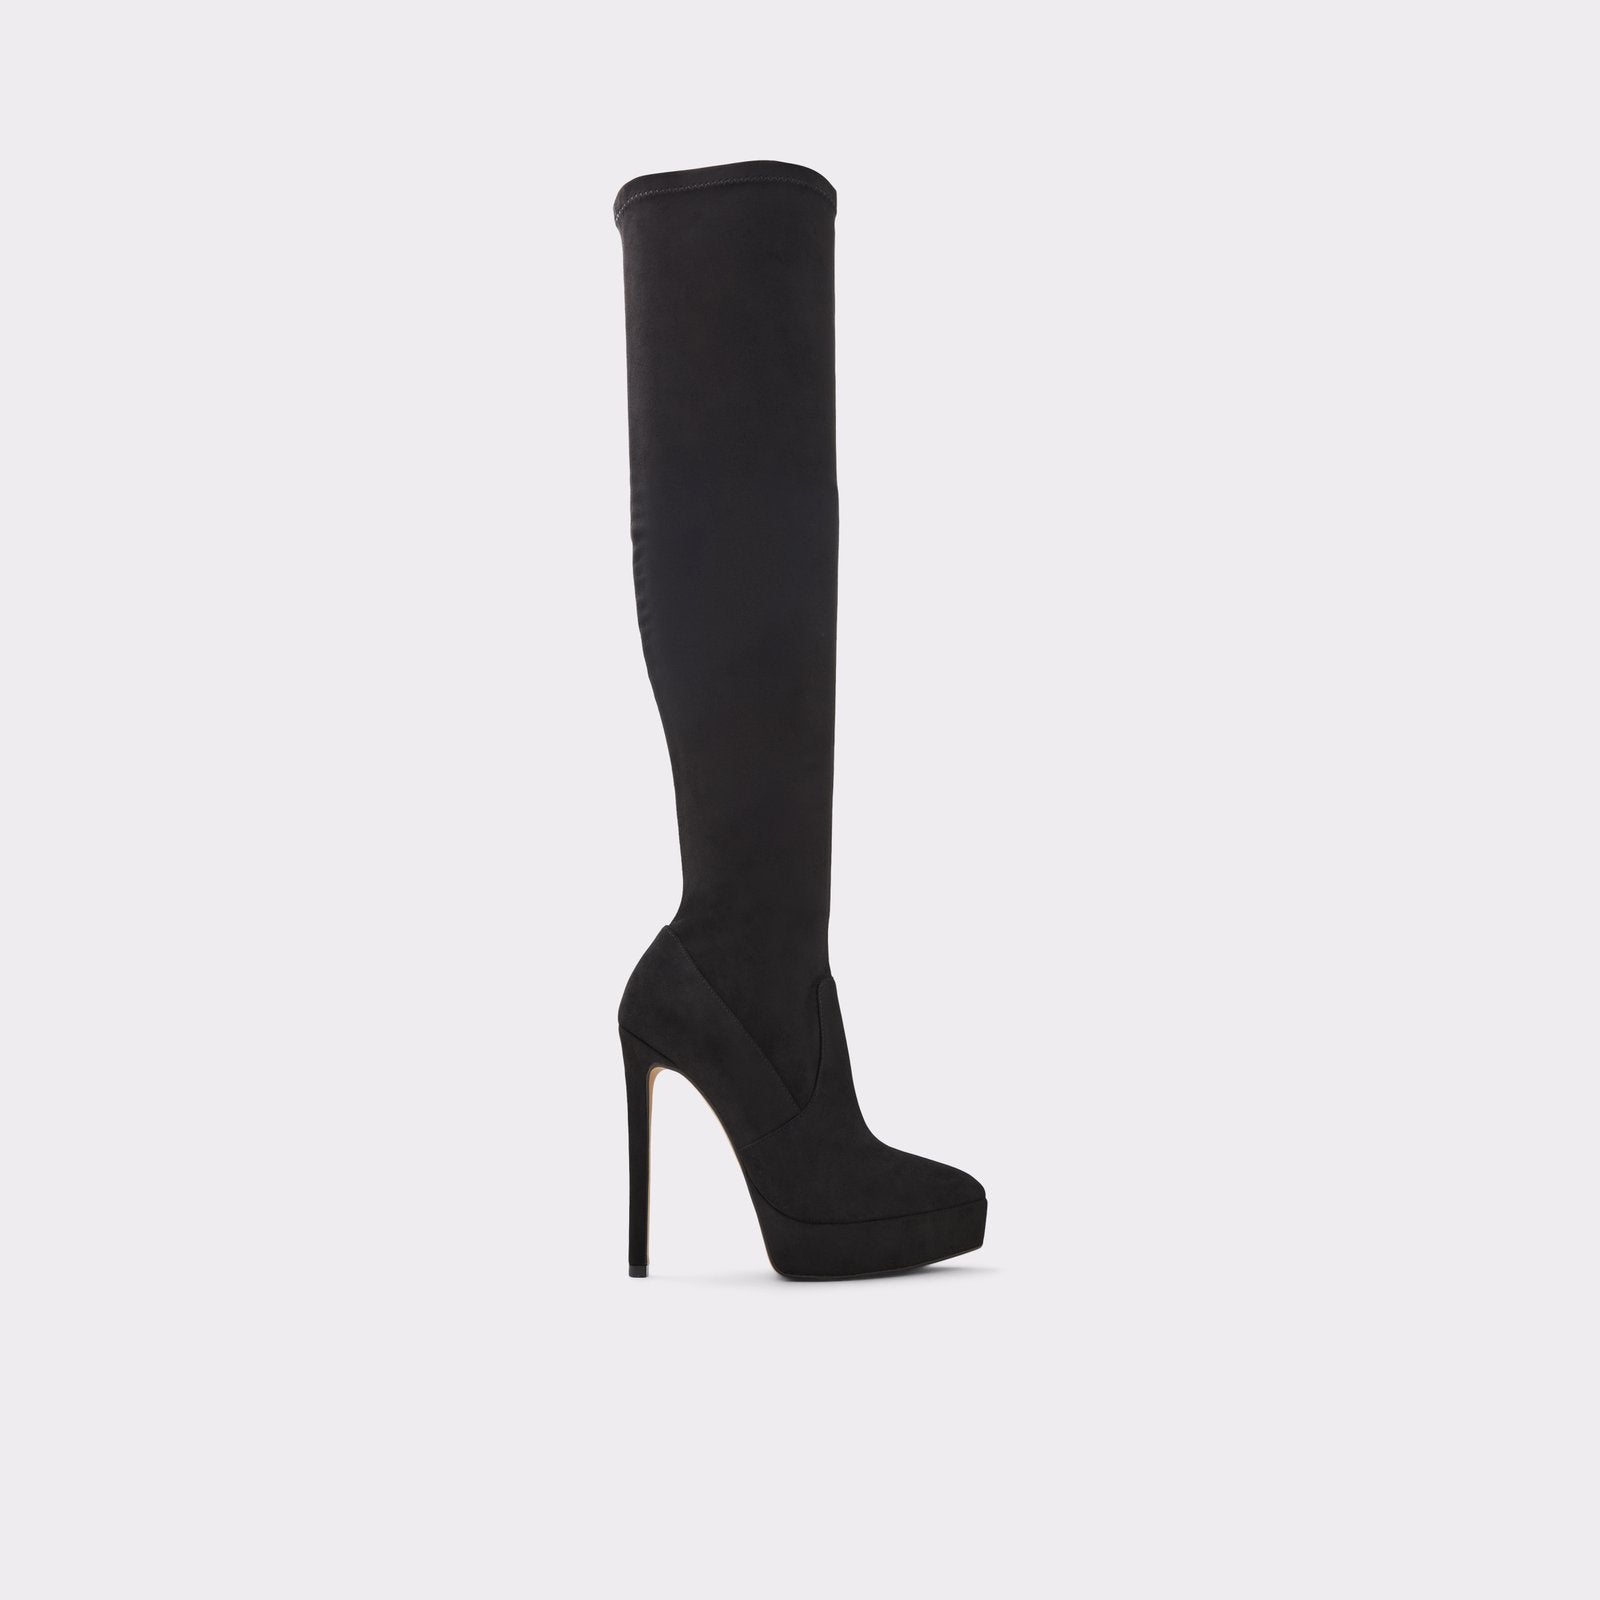 Aldo Women’s Over The Knee Boots Eruol (Other Black)